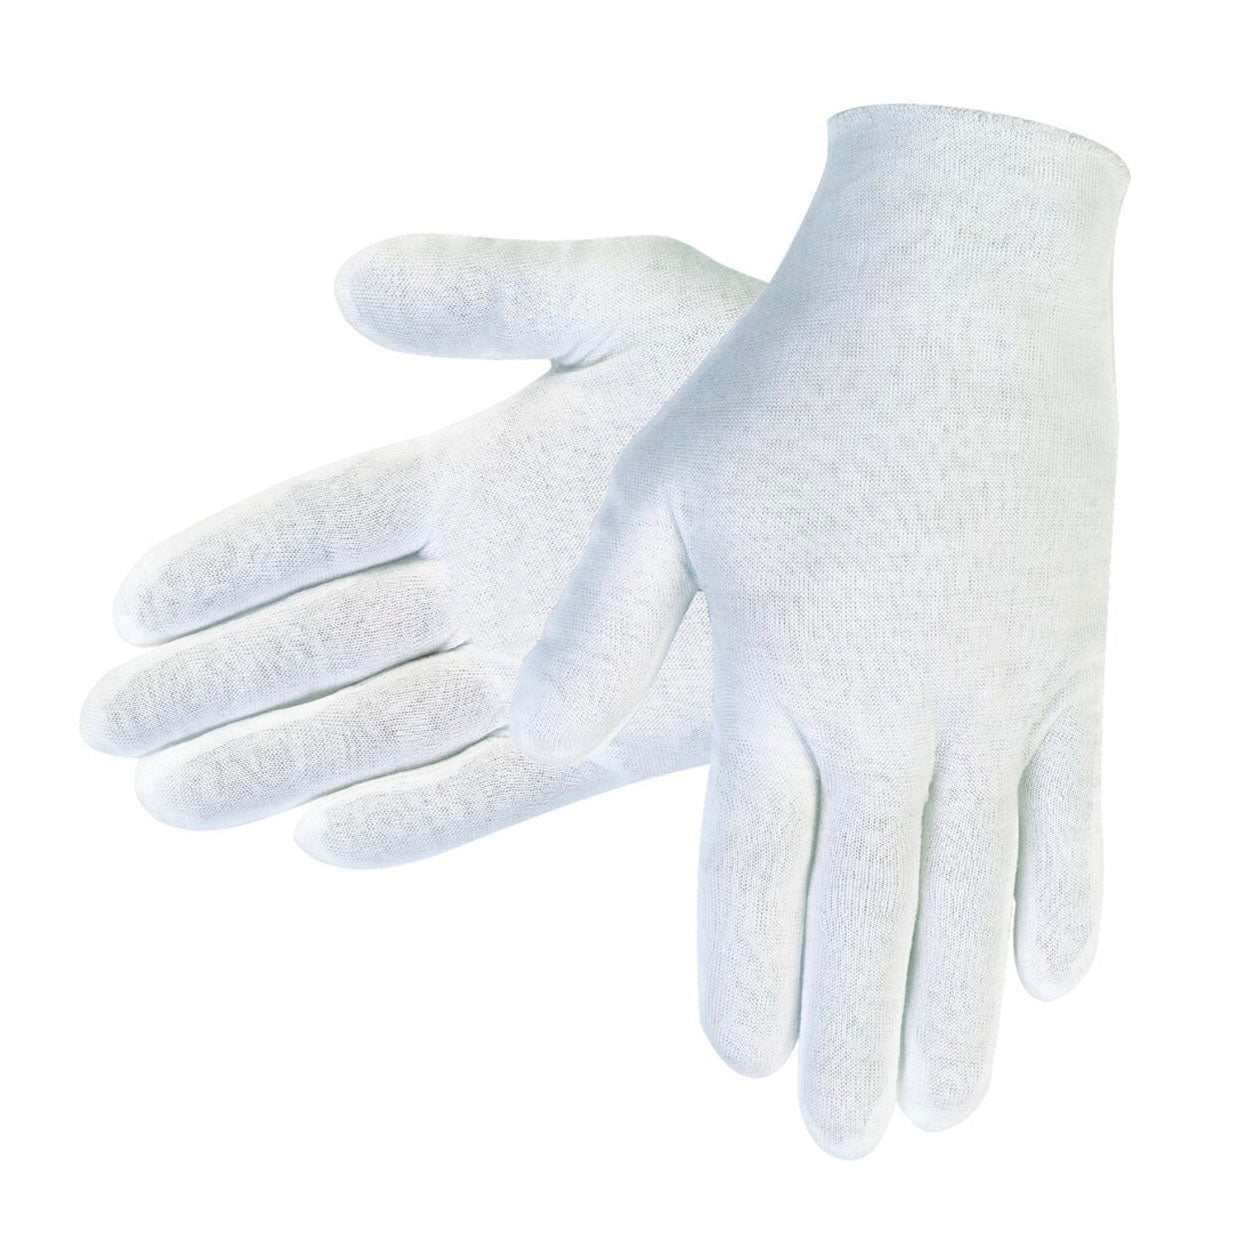  Memphis Glove Light Weight Cotton Reversible Inspection Gloves With Unhemmed Cuff 